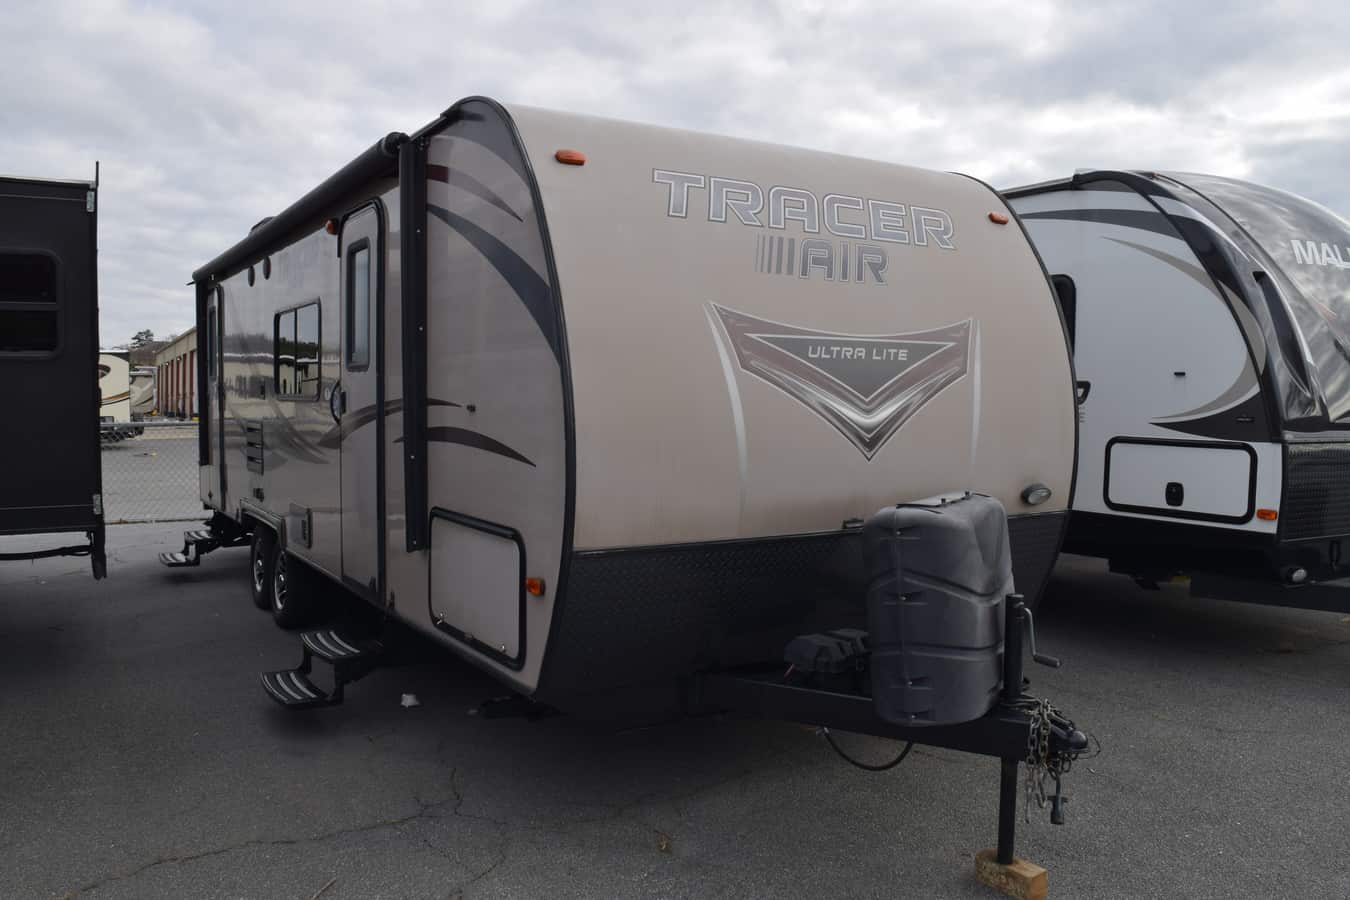 USED 2015 Prime time Tracer 250AIR